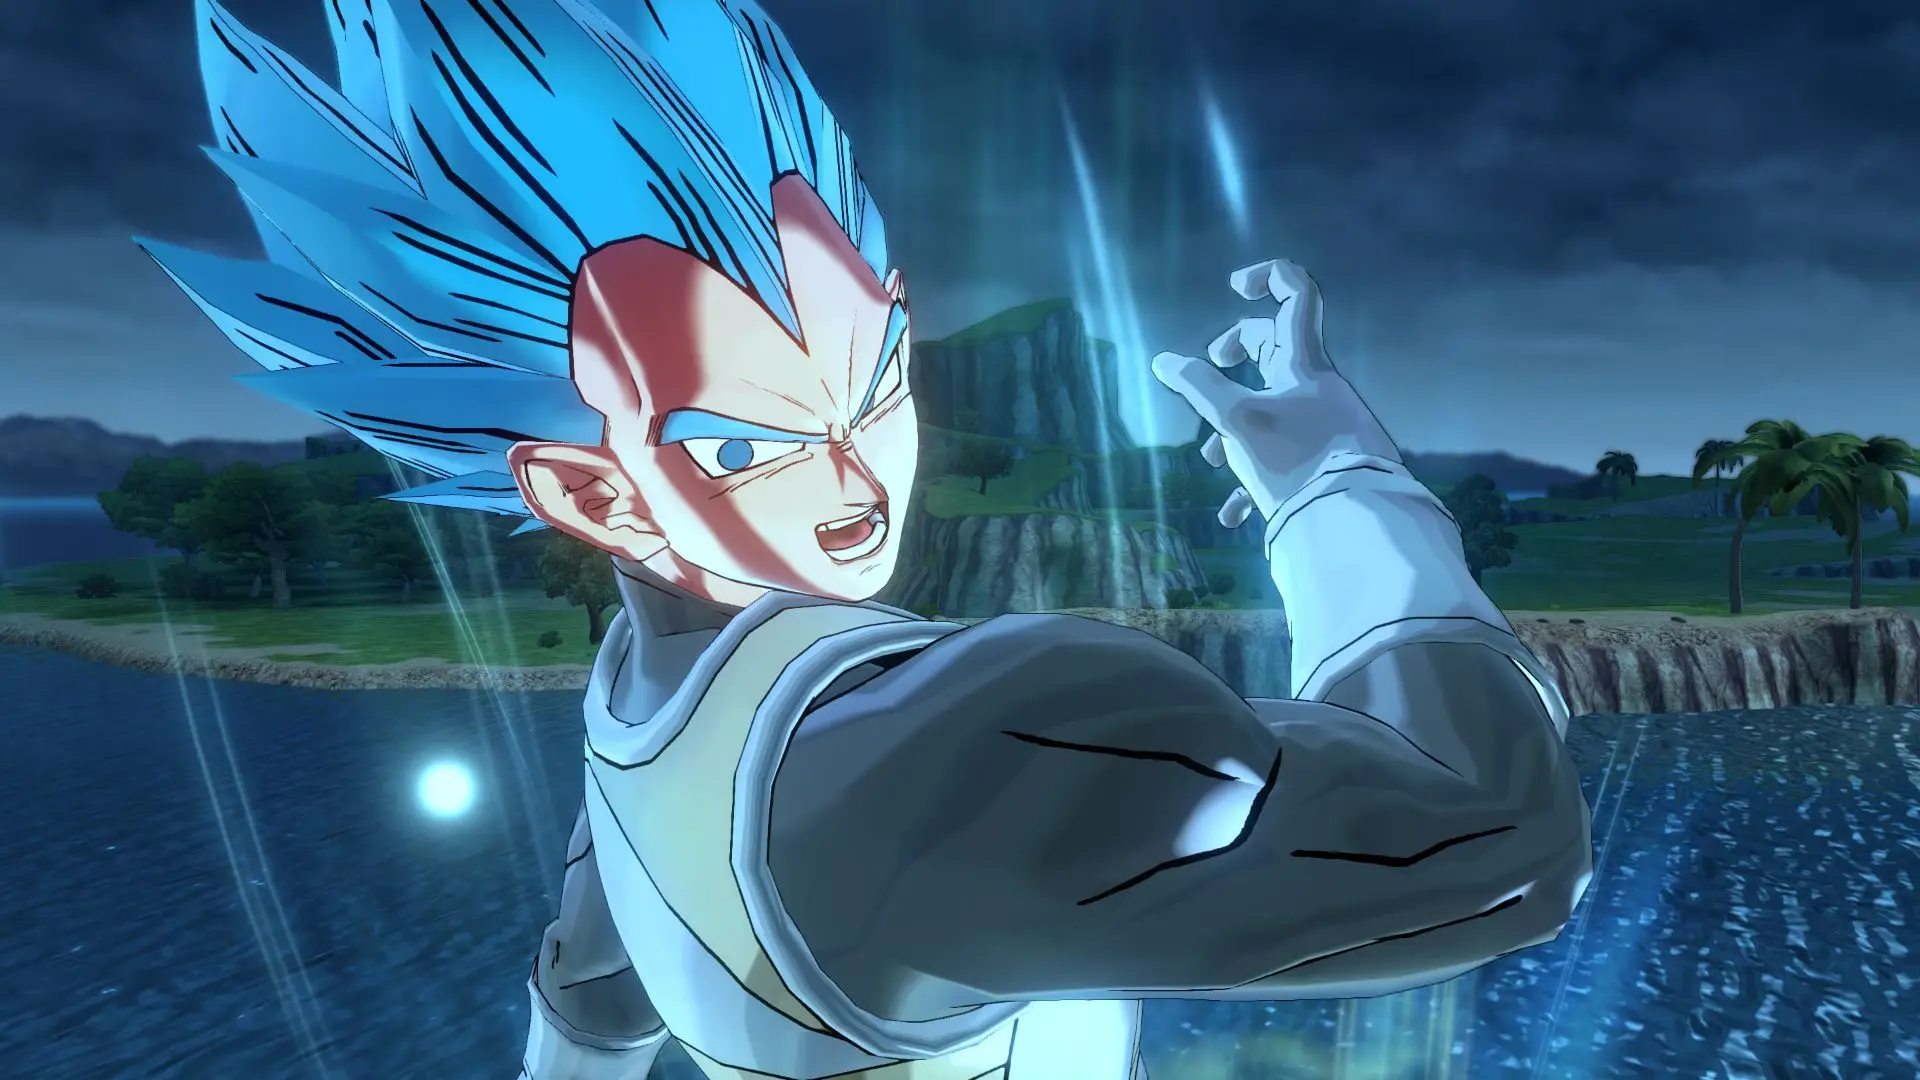 How To Get Super Saiyan Blue in Xenoverse 2